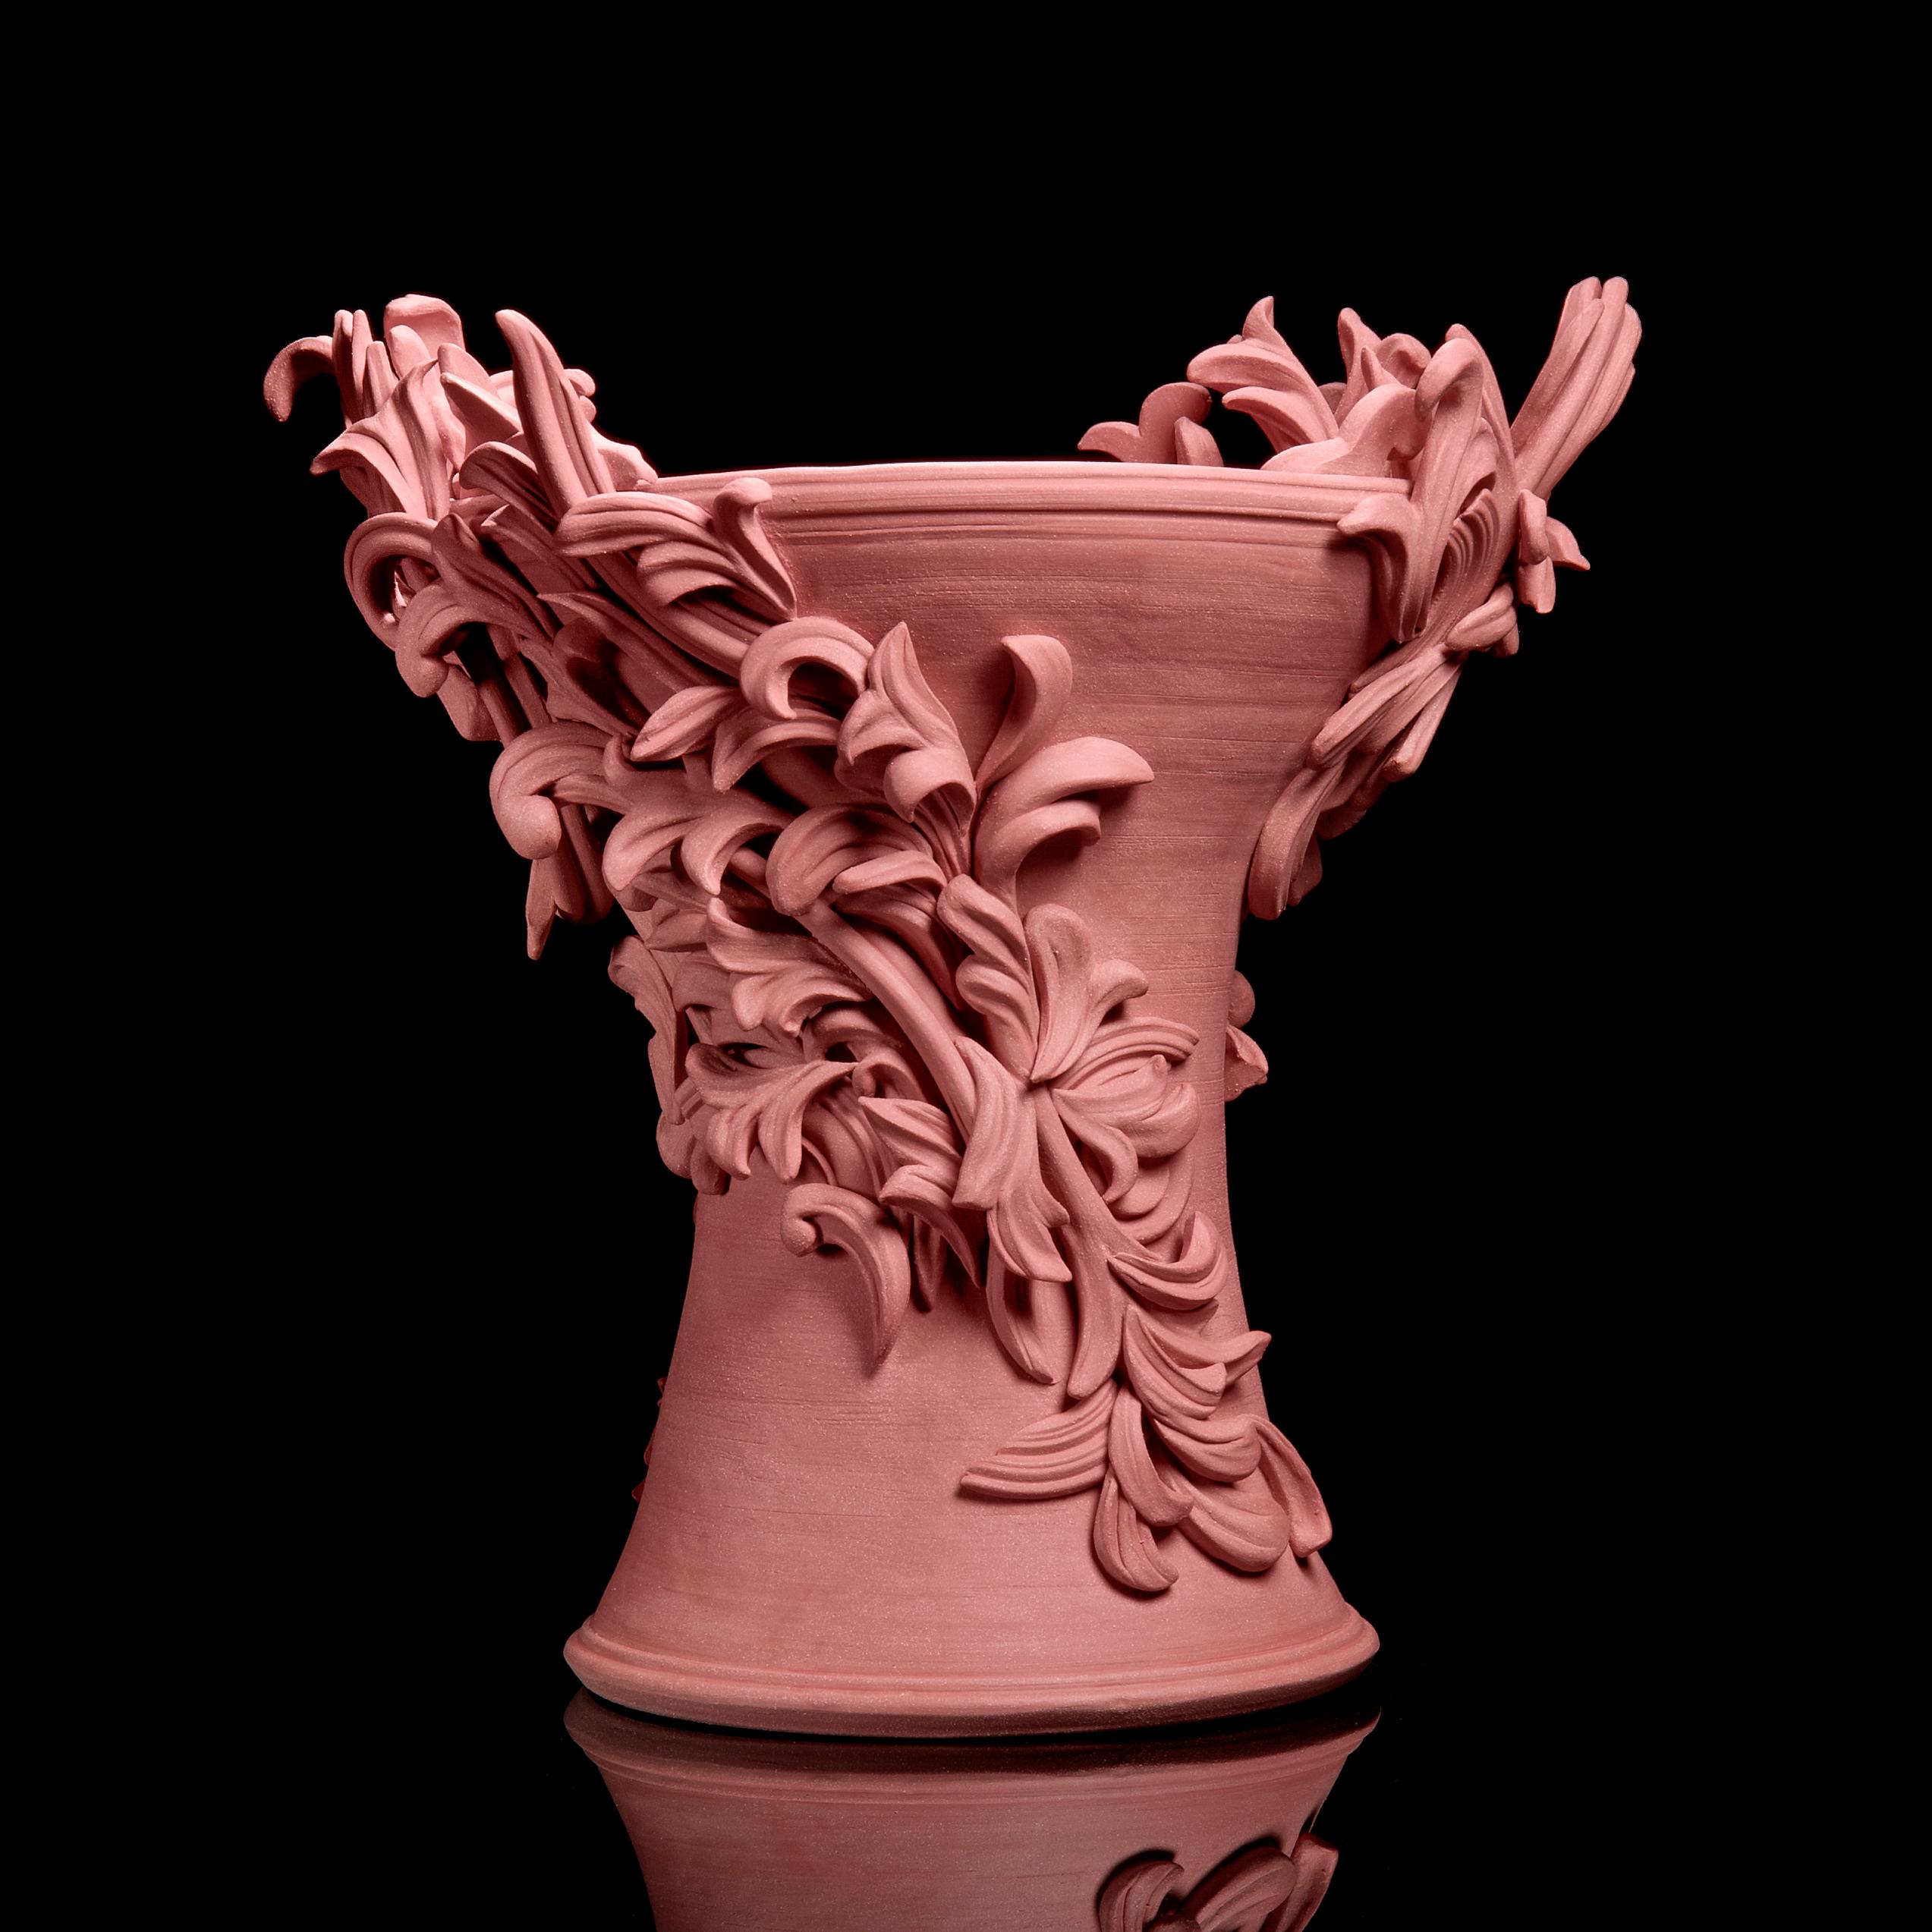 Vari Capitelli V is a unique handmade colored stoneware ceramic sculptural vase in vibrant salmon pink by the British artist Jo Taylor. The central form has been thrown on the potter's wheel and also hand-built, then adorned with architectural